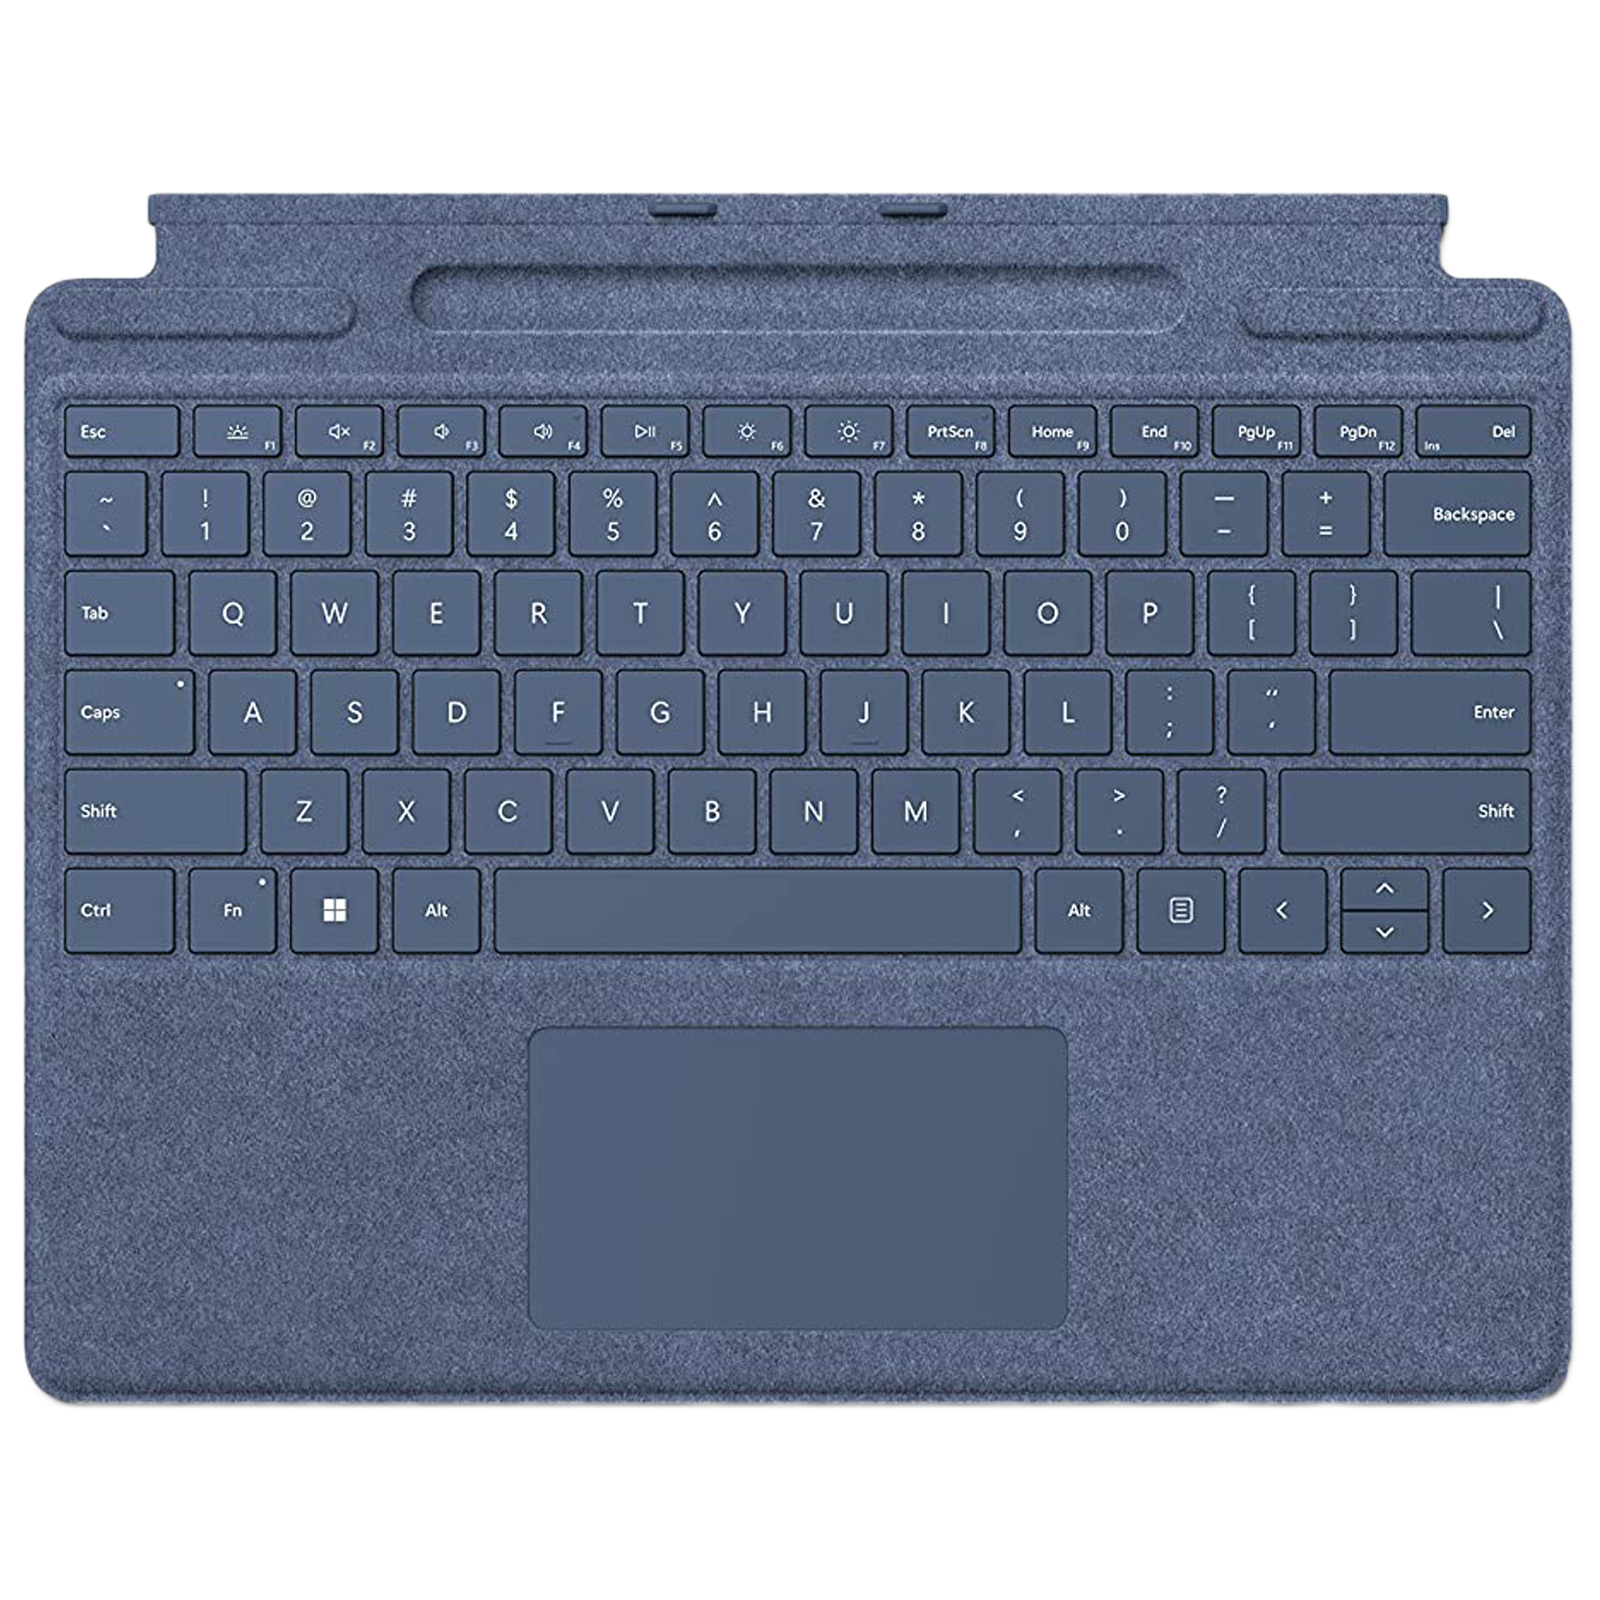 Microsoft Wireless Keyboard with Touchpad (Built-in Kickstand, Sapphire)